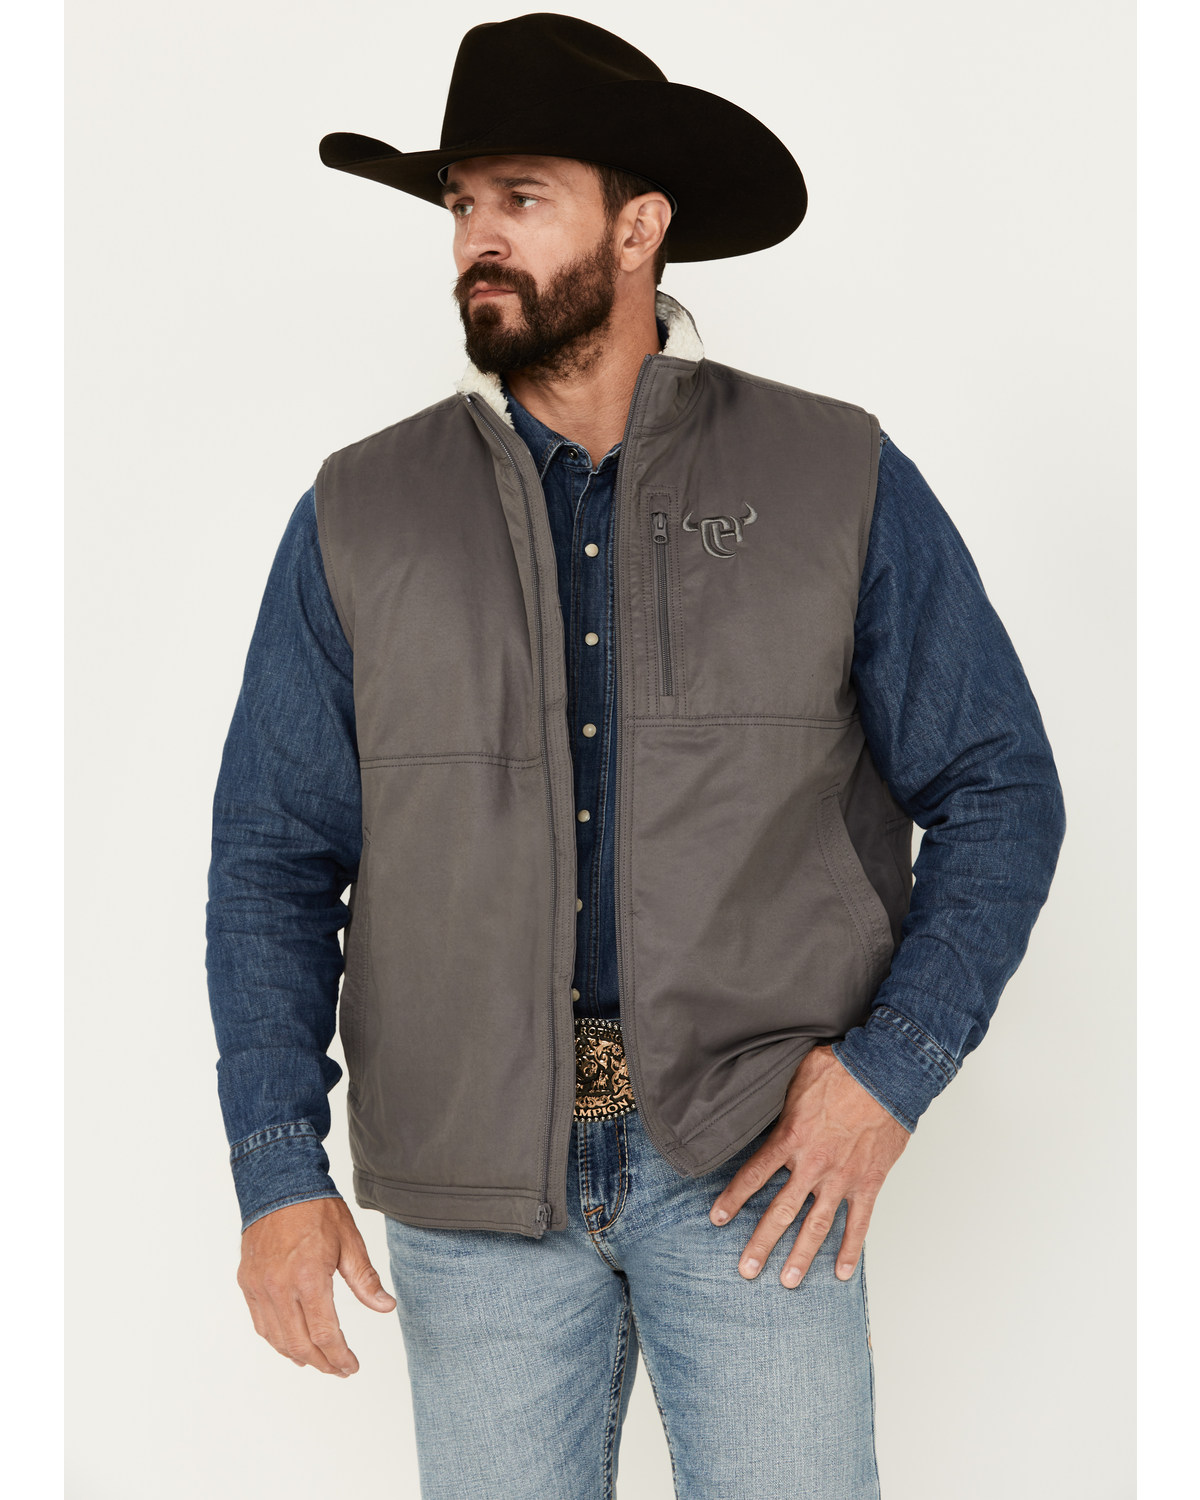 Cowboy Hardware Men's Heavy Twill Concealed Carry Sherpa Collar Vest